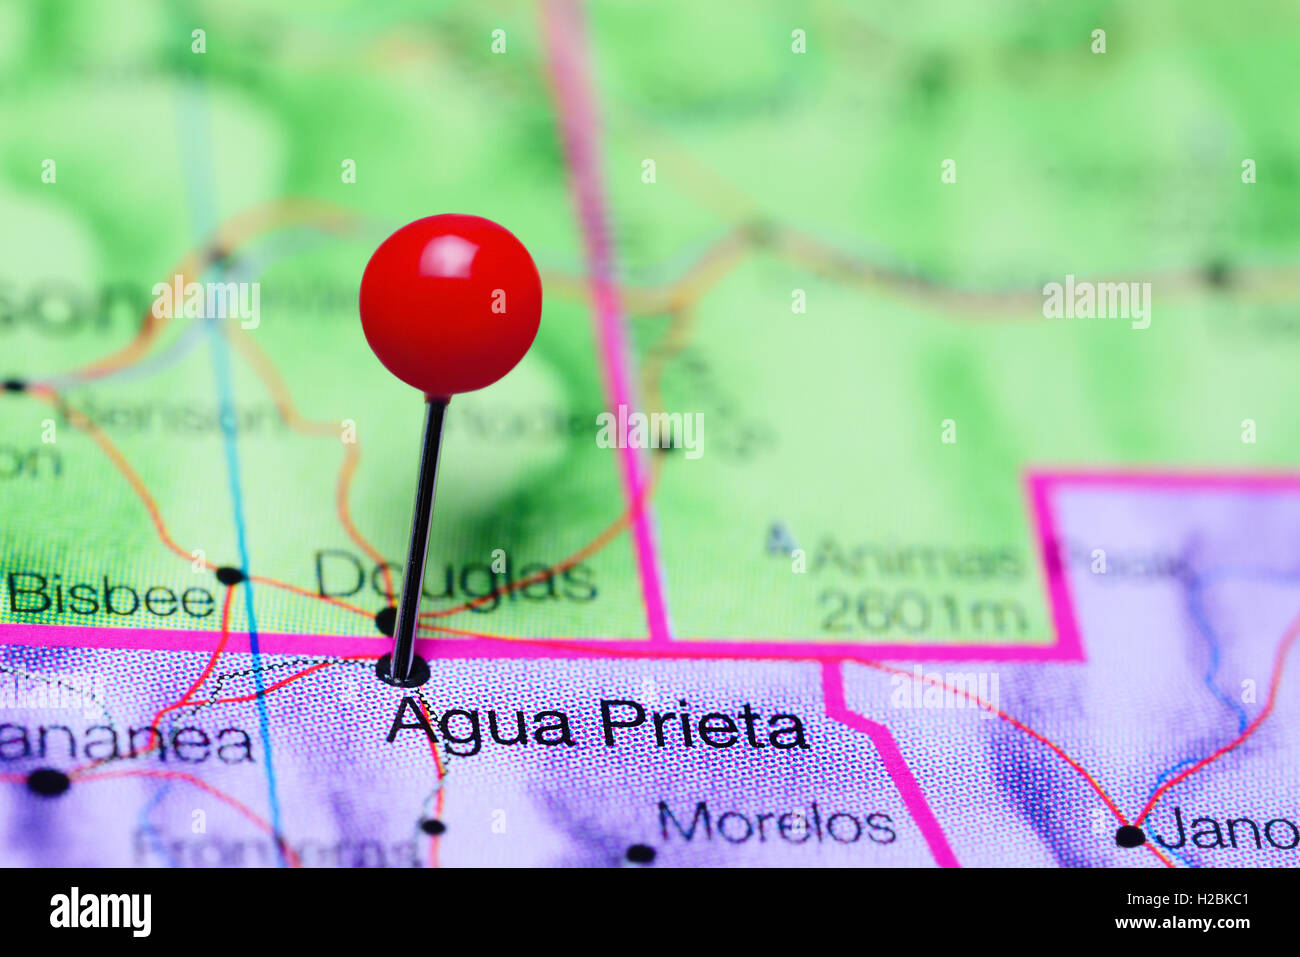 Agua Prieta pinned on a map of Mexico Stock Photo